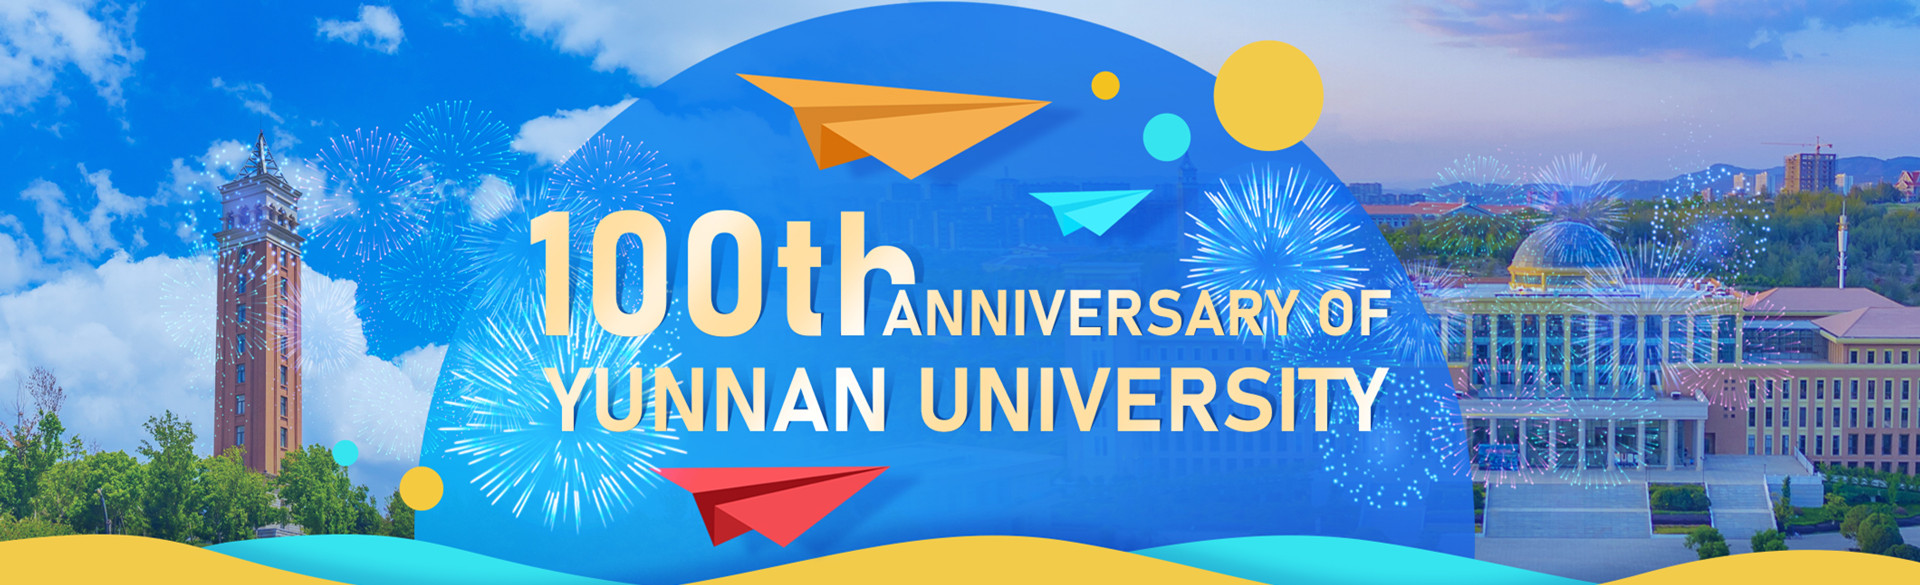 Special: 100th anniversary of Yunnan University